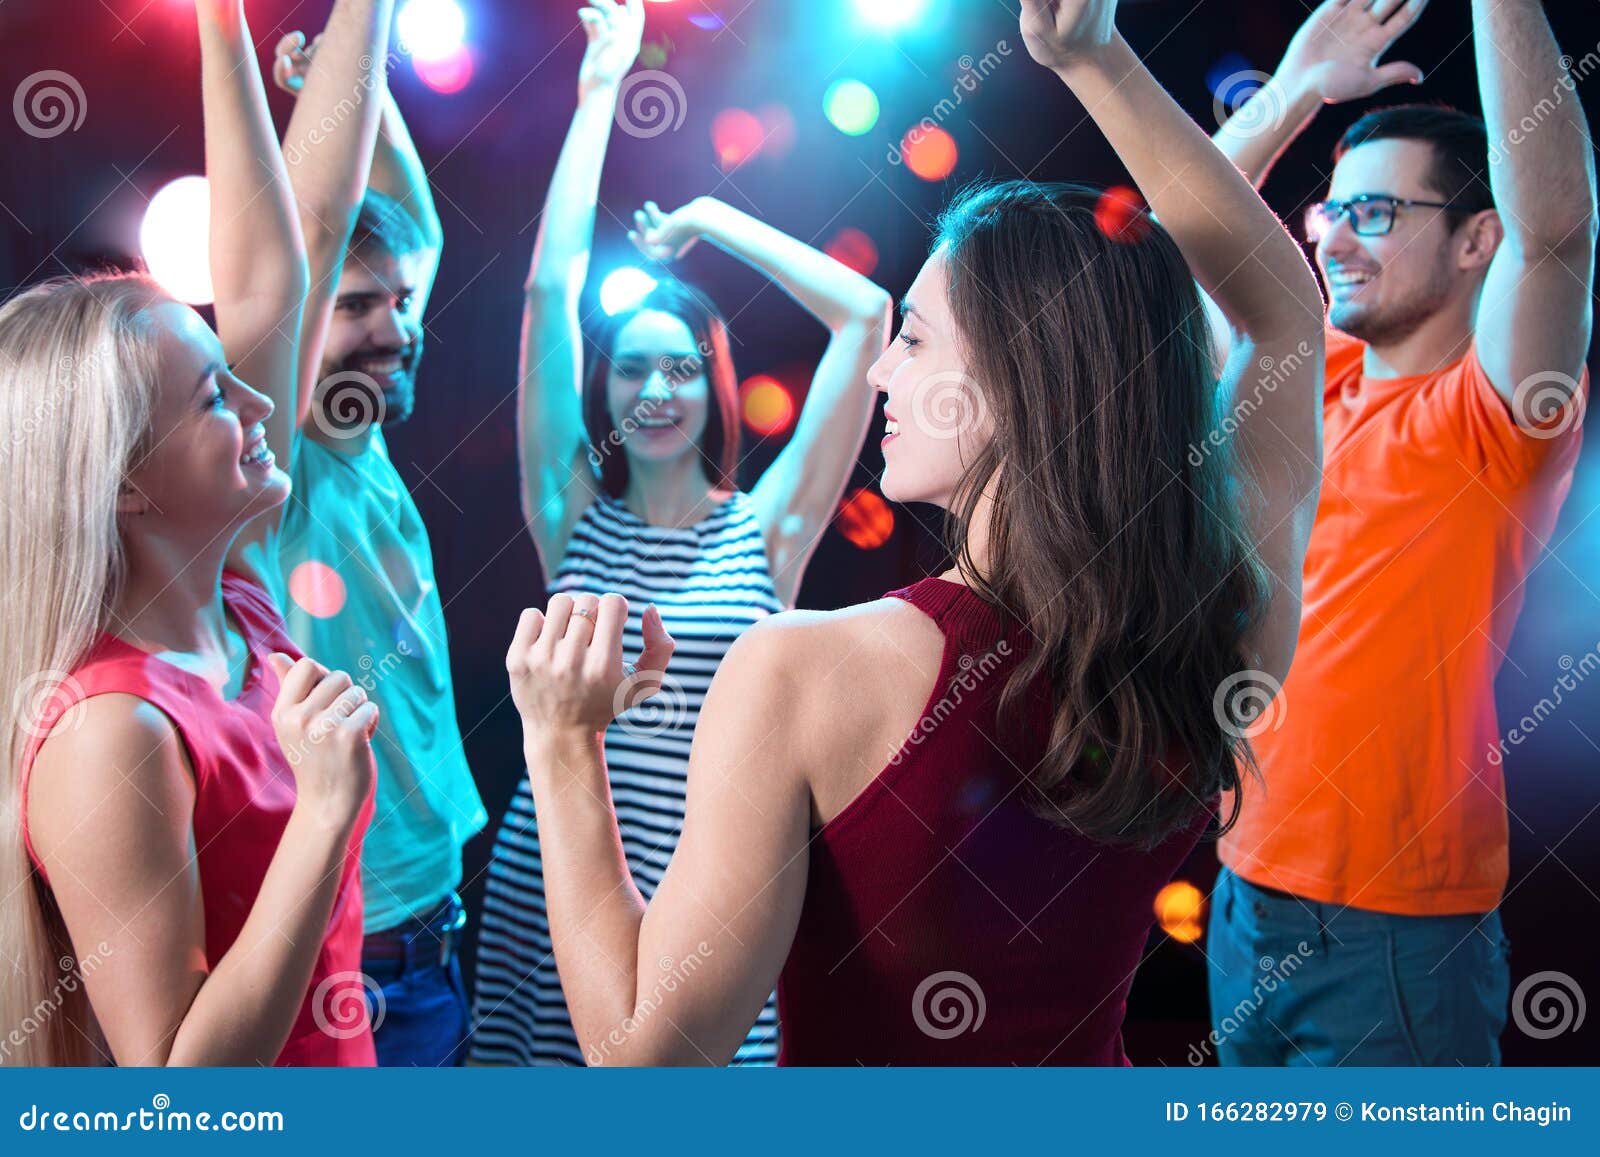 Group of Young People Having Fun Dancing at Party Stock Image - Image ...